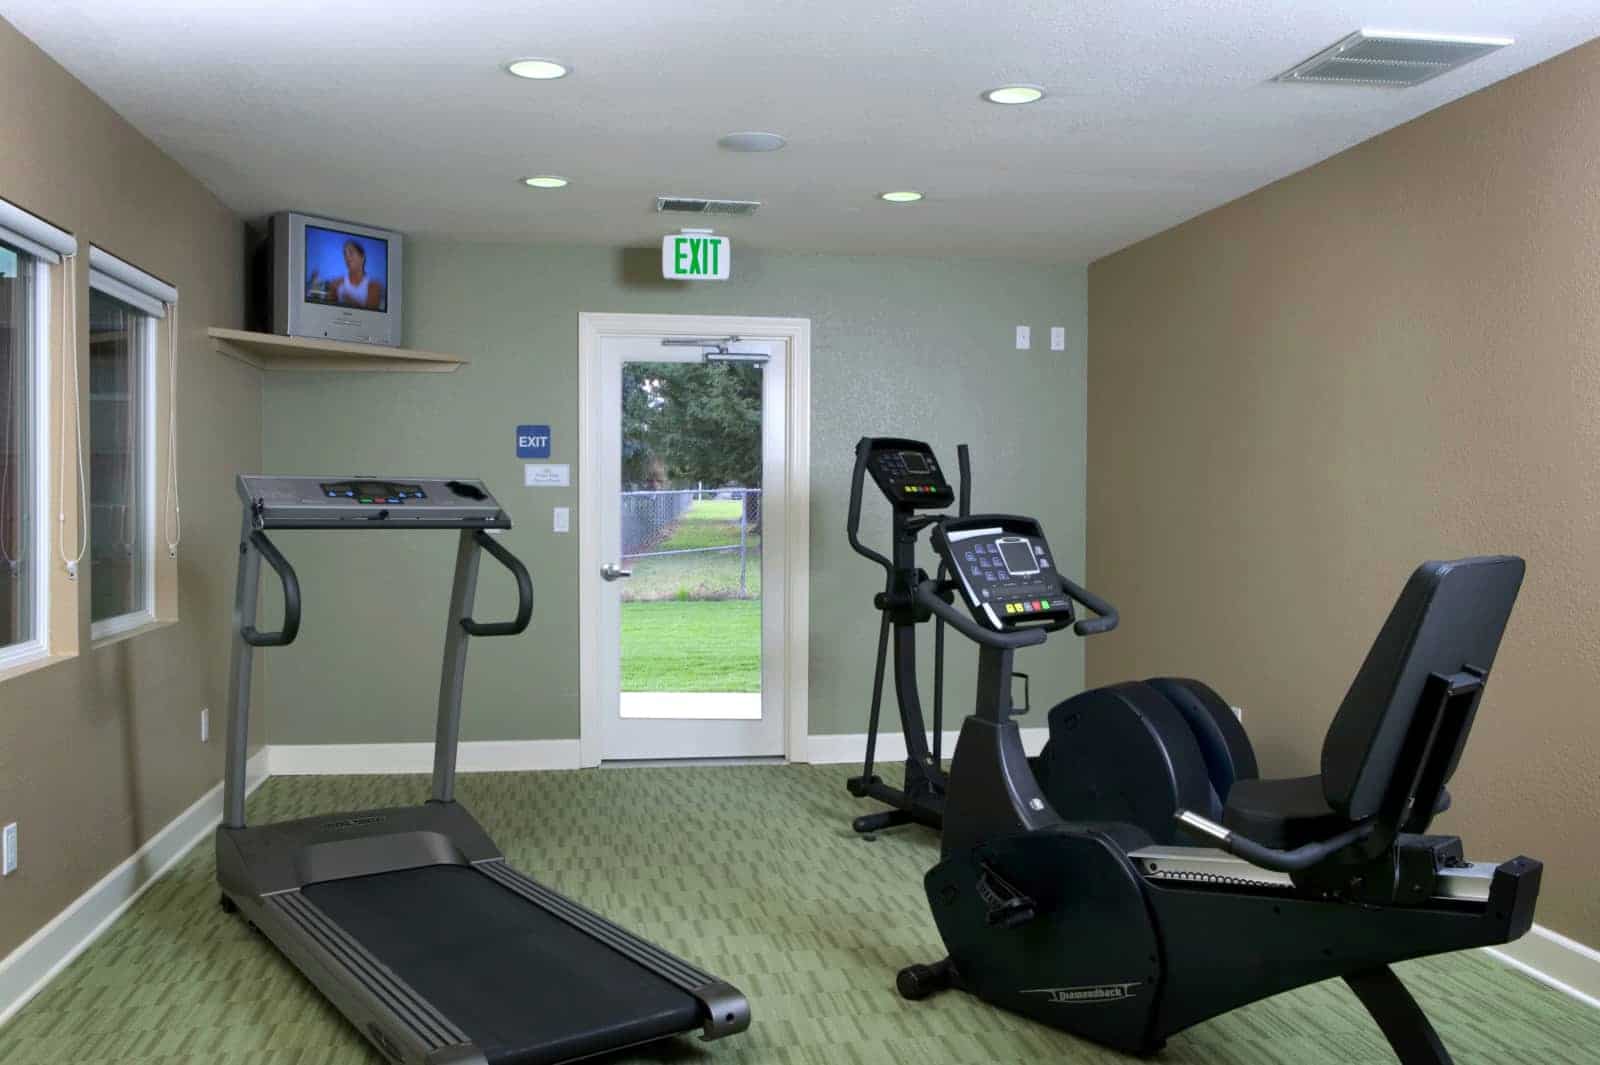 View of the fitness center with 3 cardio machines and a TV.